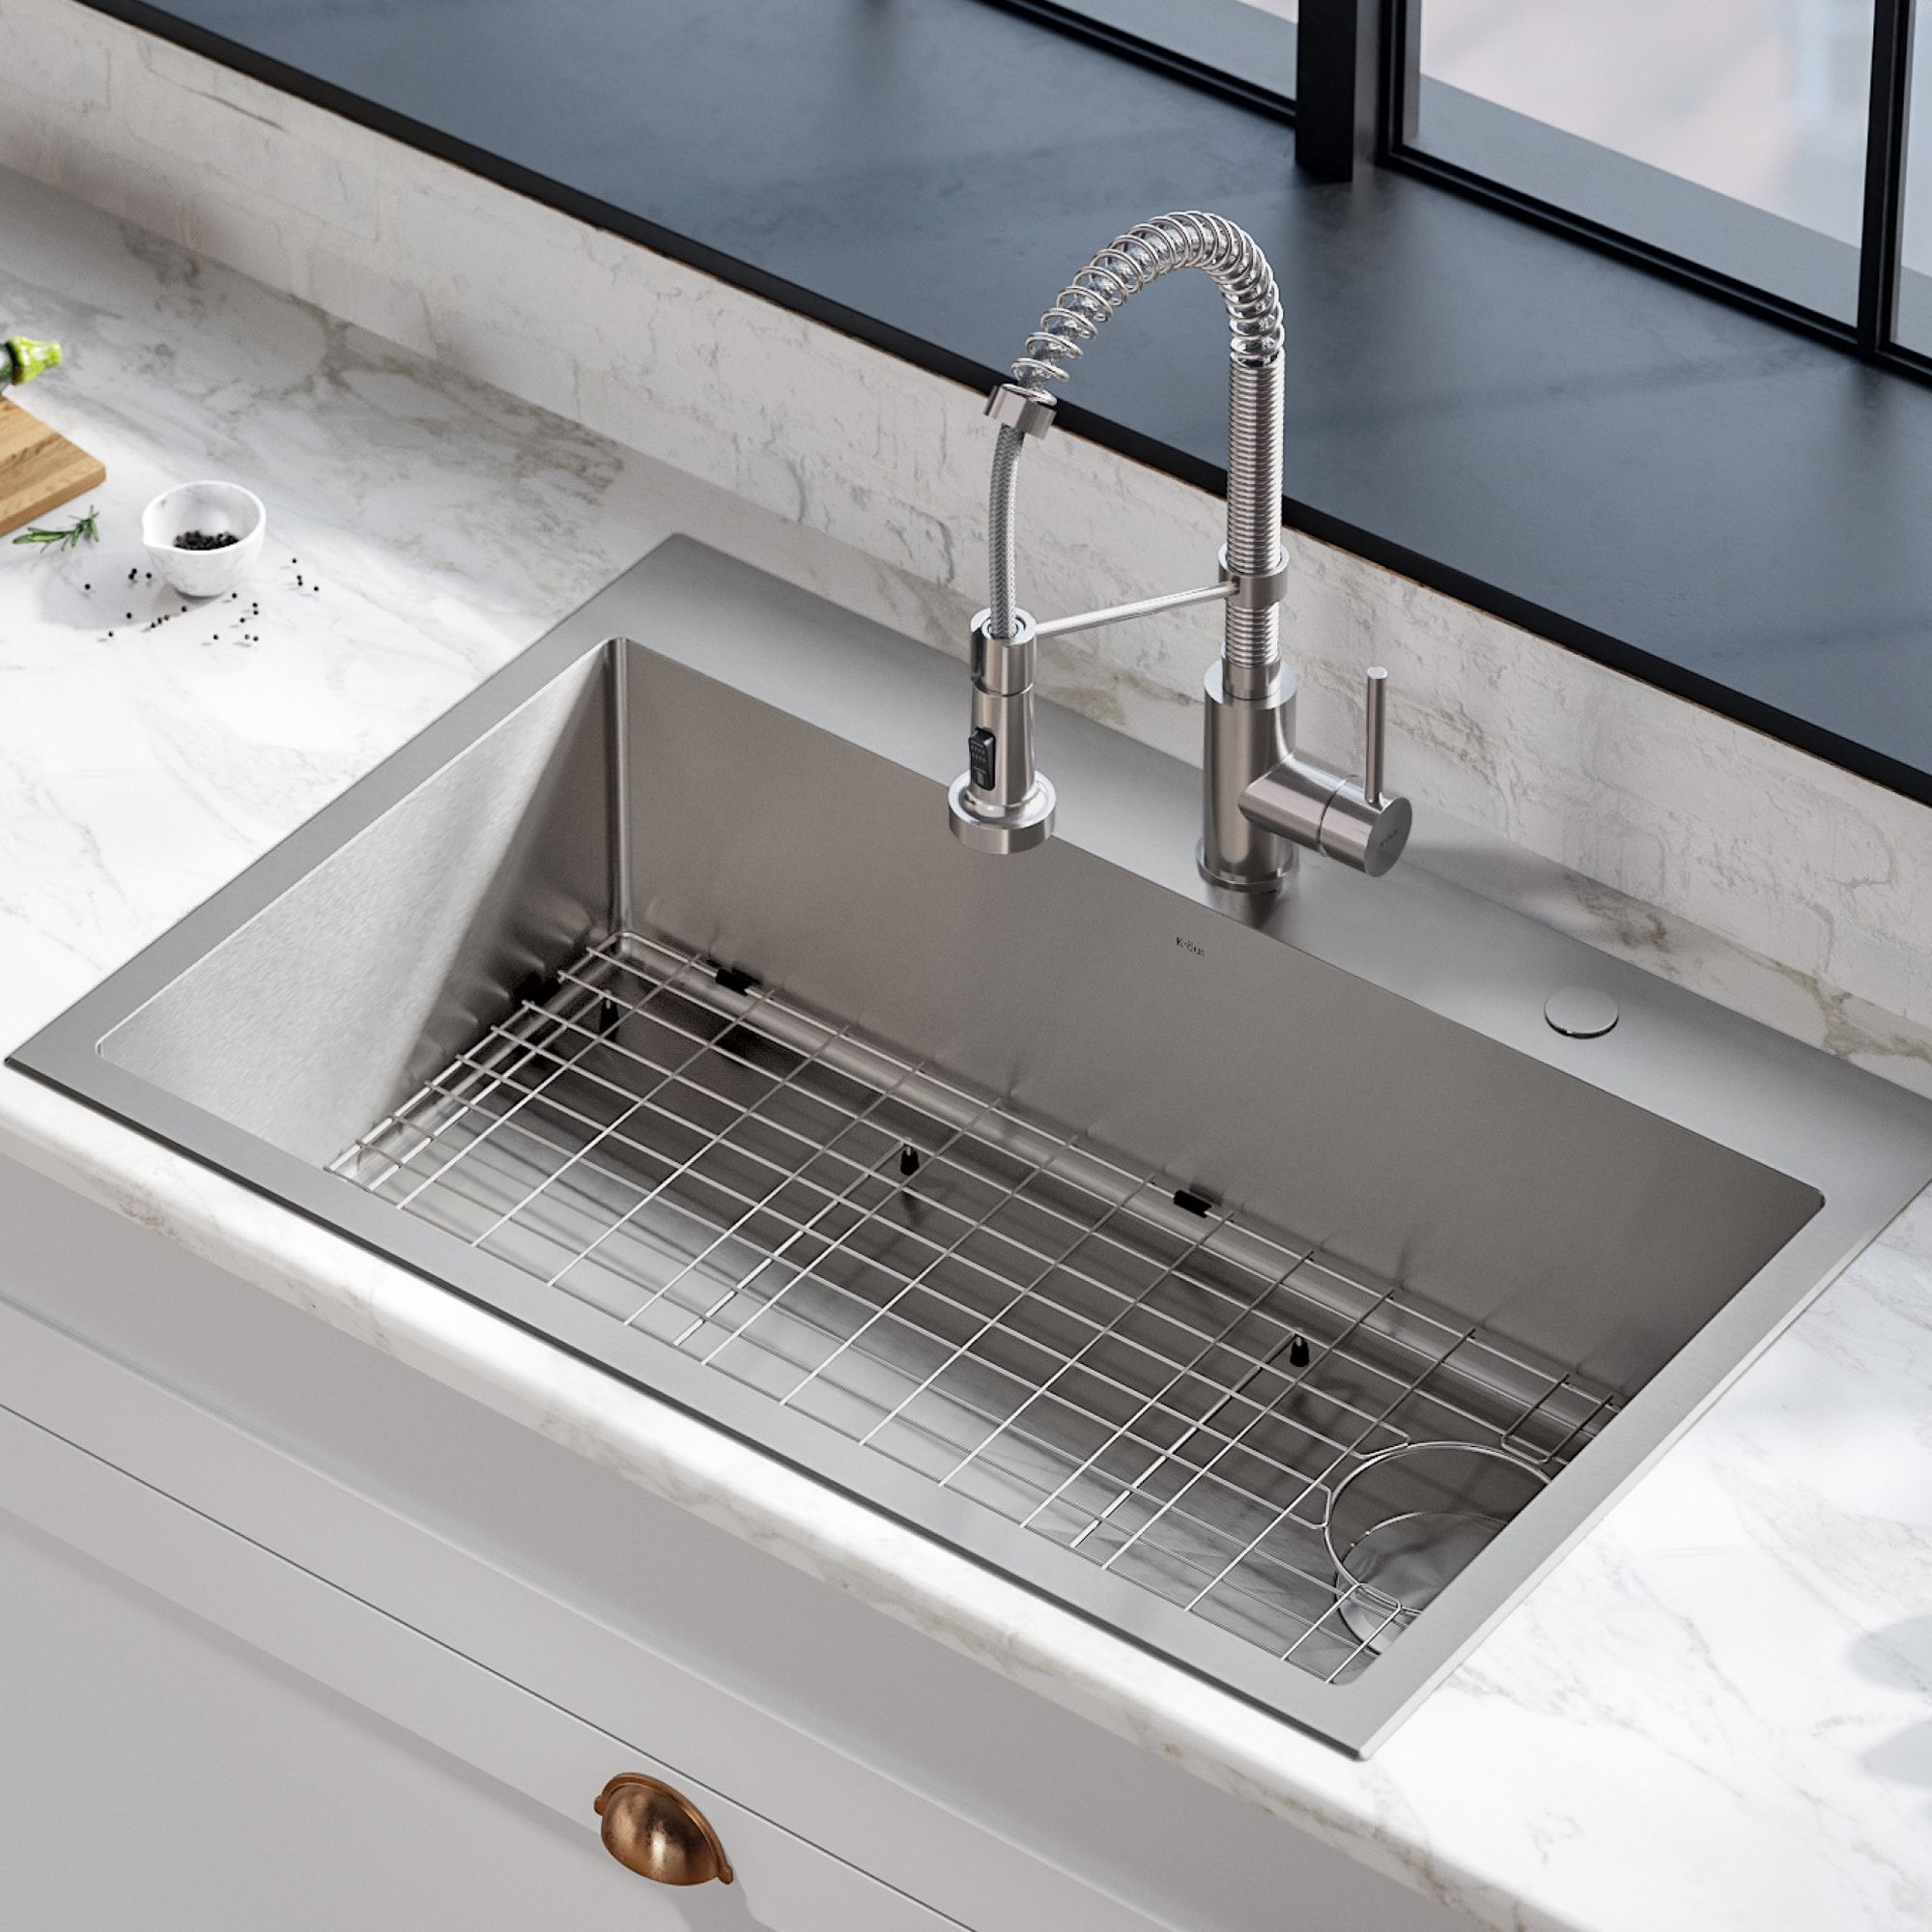 Points to remember when Buying a Stylish StainlessSteel Kitchen Sink